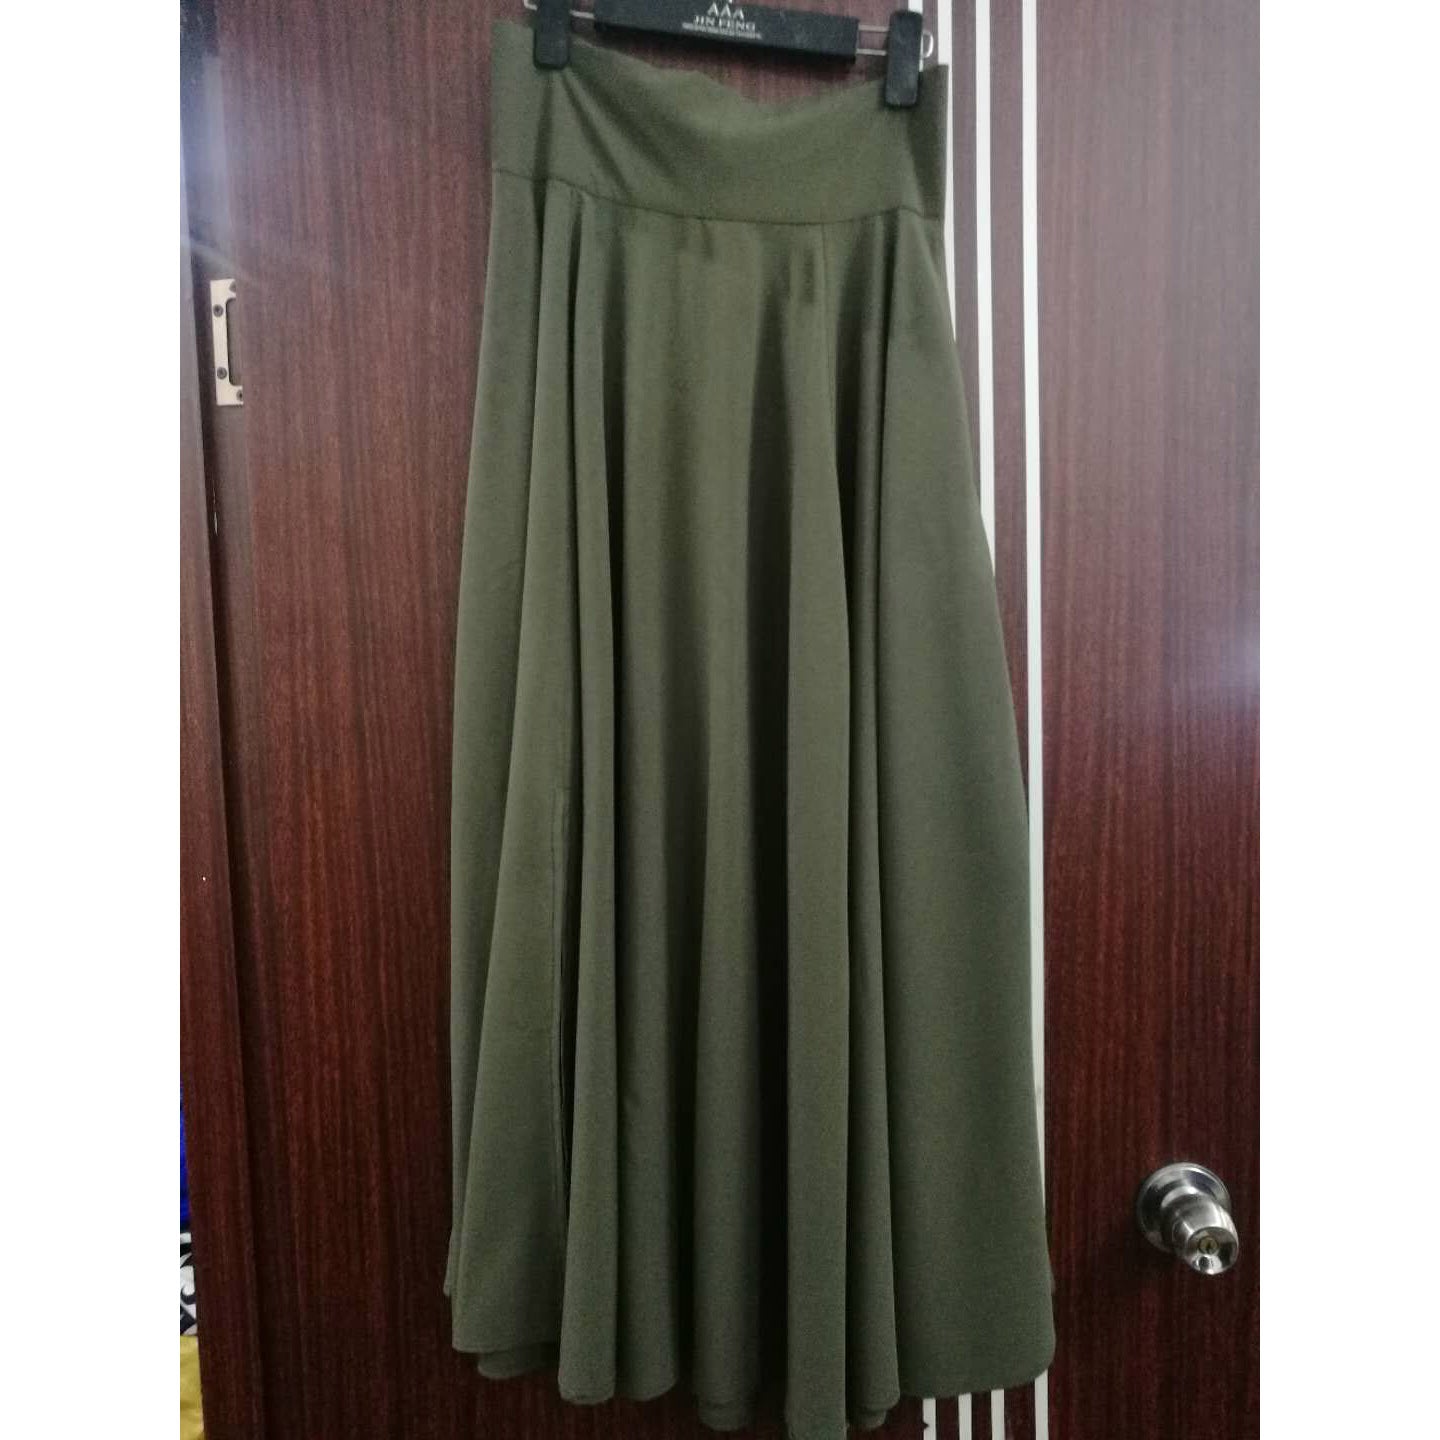 Back Straps Bowknot High Waist Long Swing Skirt with Pockets